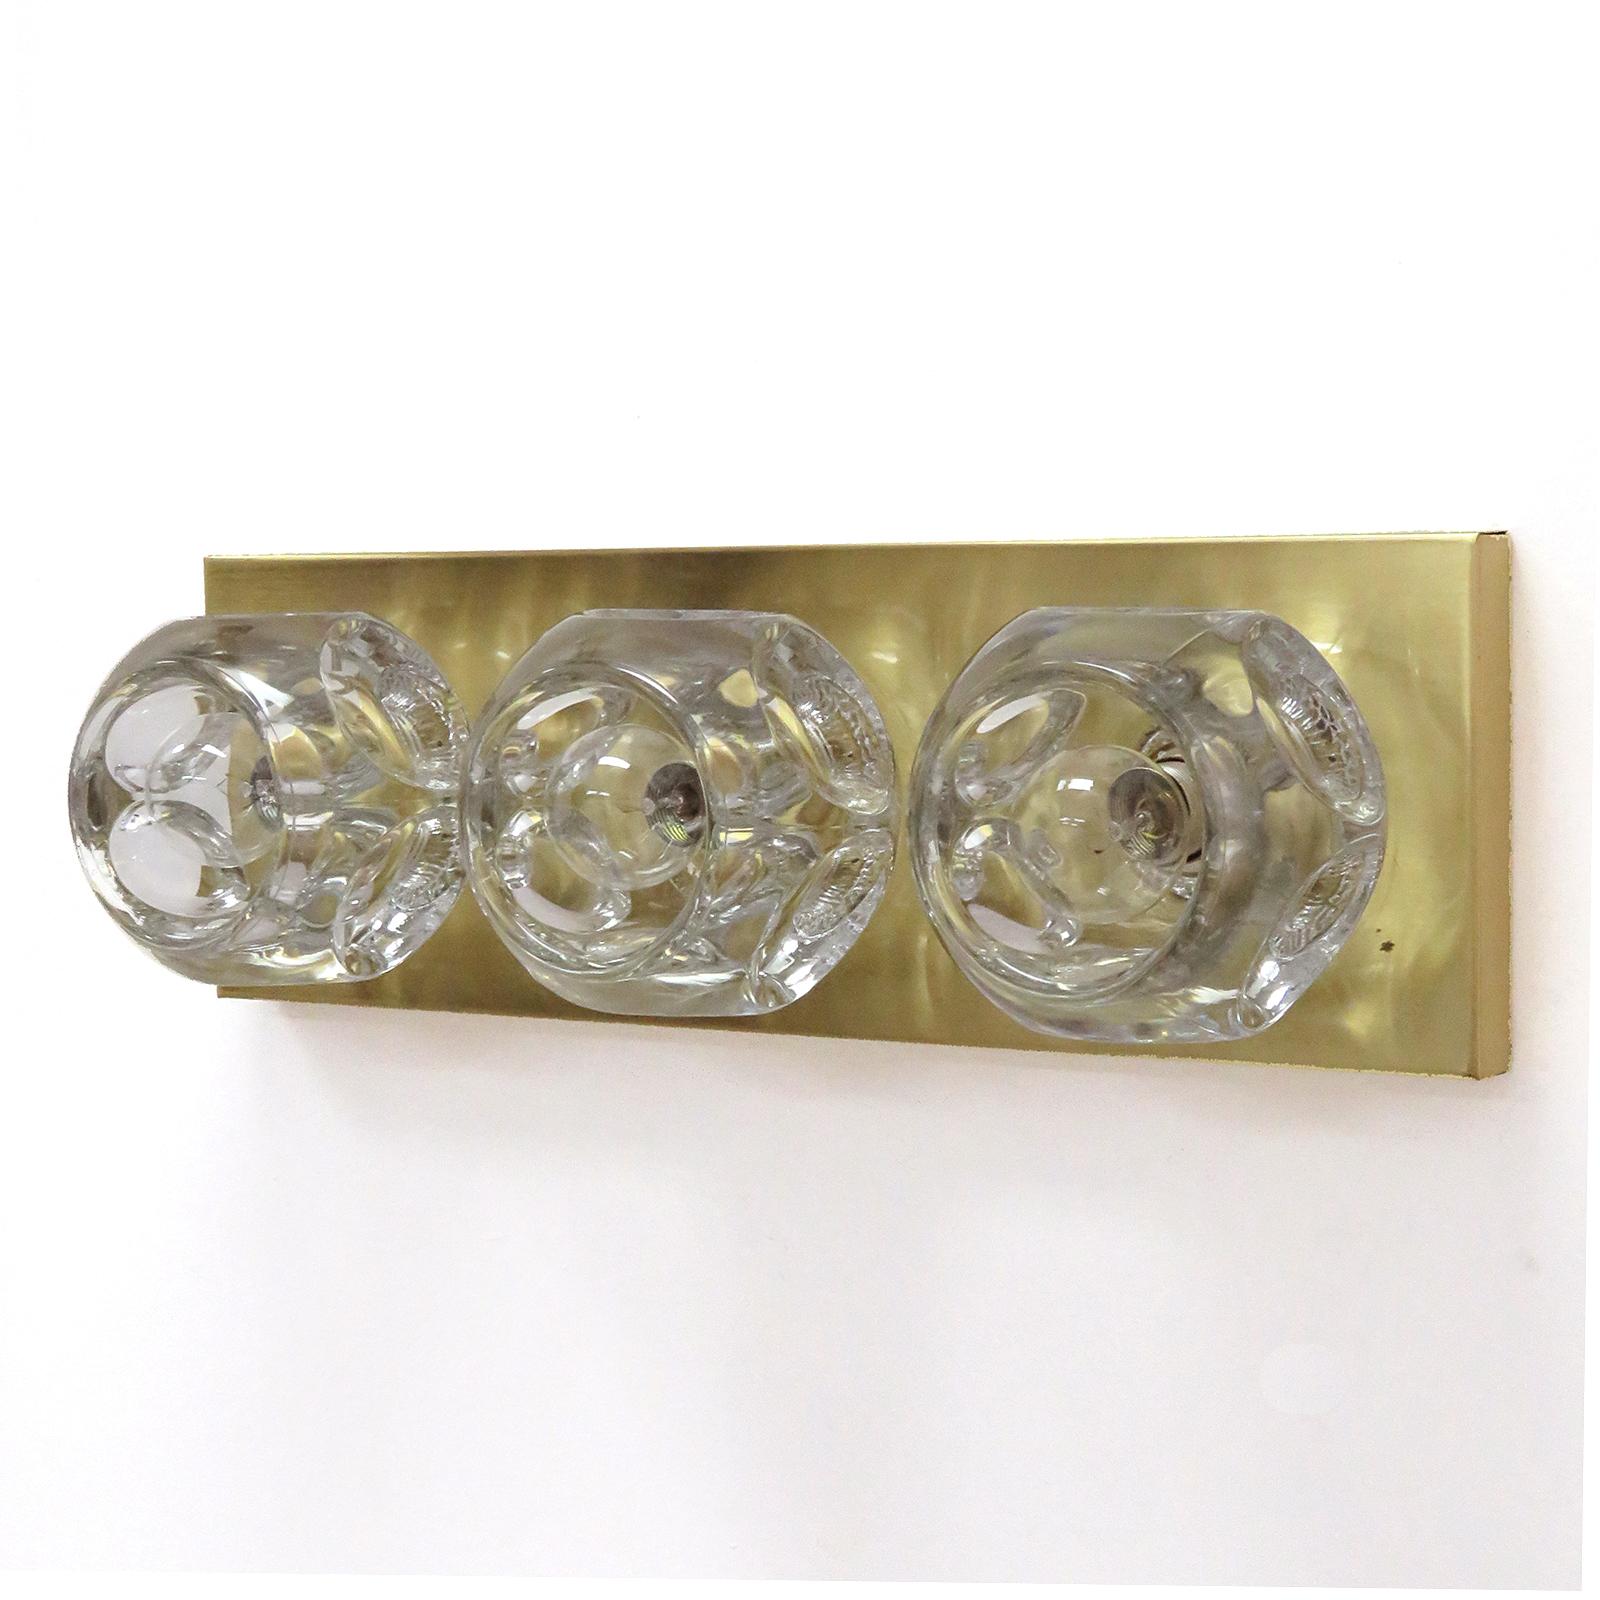 Stunning pair of cubic wall light by Peill & Putzler, Germany, with three large faceted, solid glass spheres with artful bubble inclusions, mounted to a brass plate, can be mounted horizontally or vertically, optional use as a ceiling flush mount,